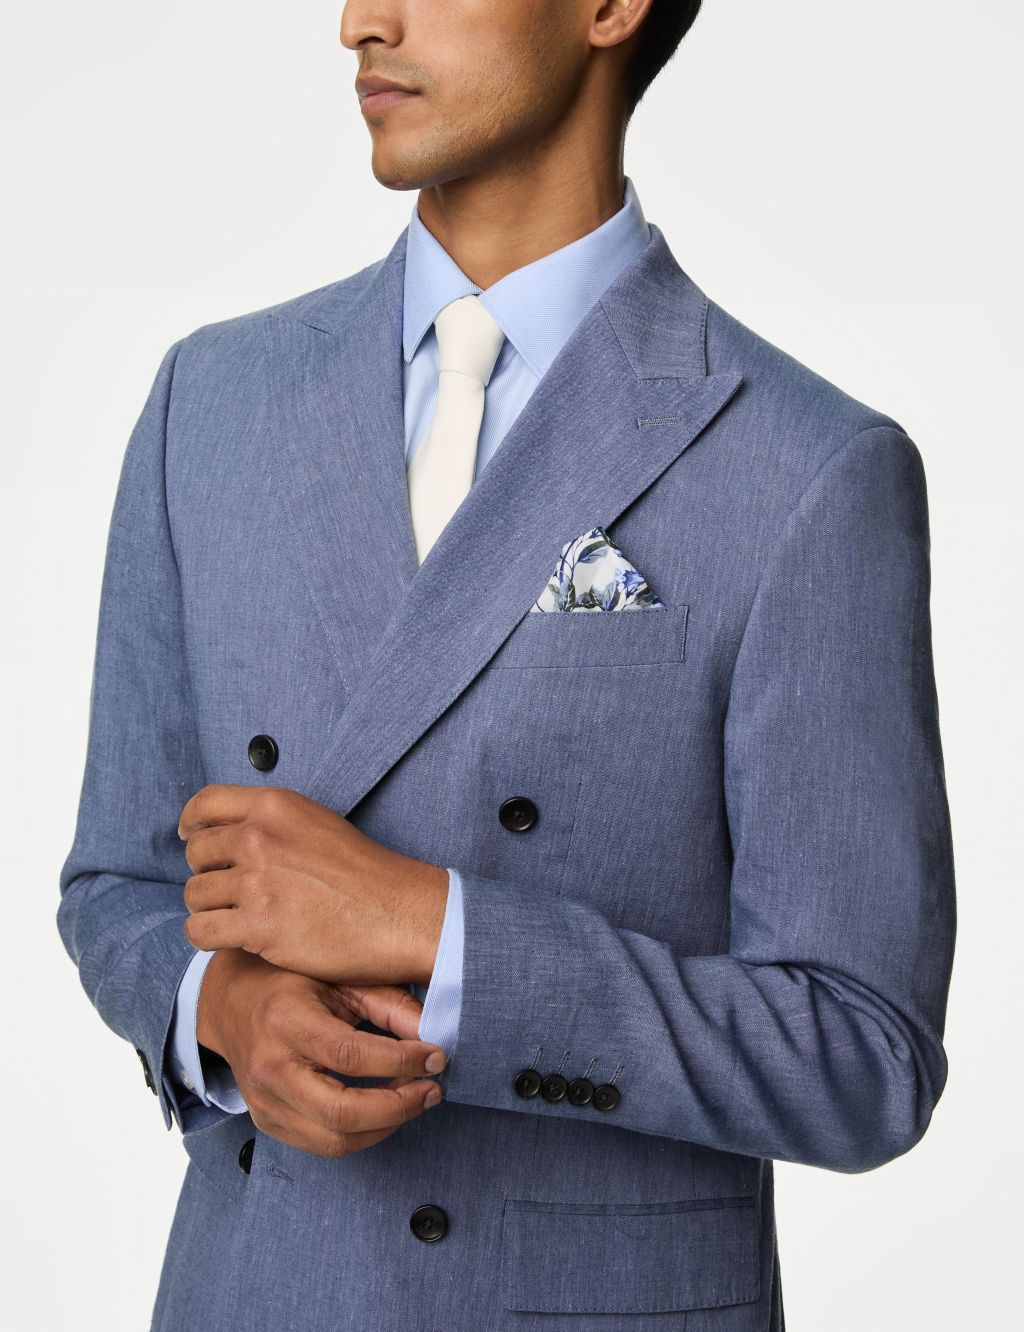 Tailored Fit Italian Linen Miracle™ Suit Jacket image 3